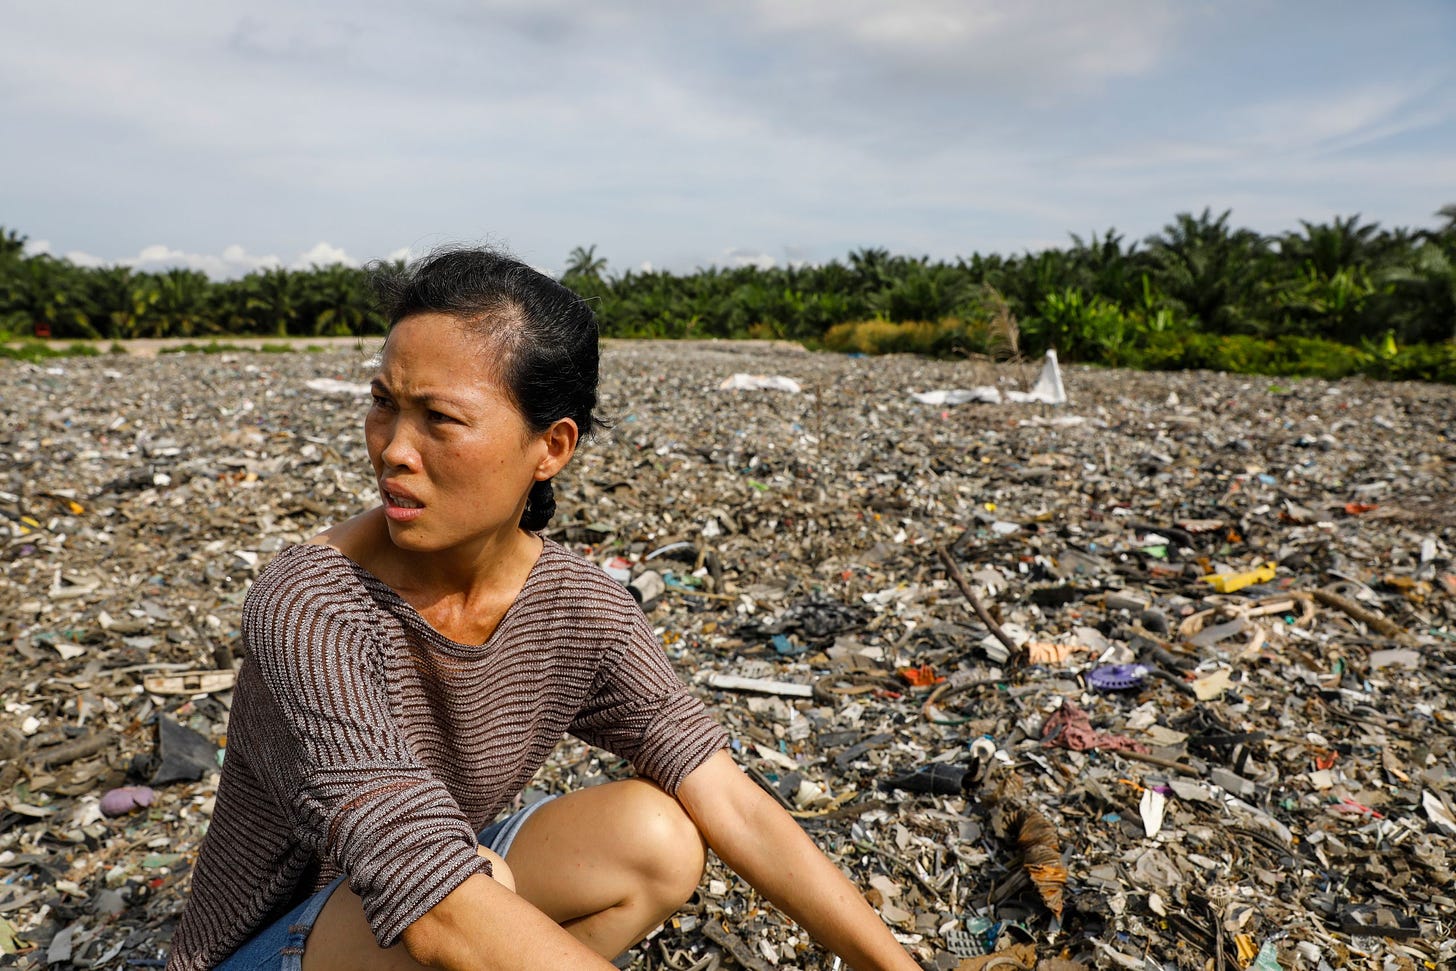 Pua Lay Peng, a resident-turned-activist, checks out an illegal dumping site near Jenjarom, Feb. 2. From 1950 to 2015, a stag